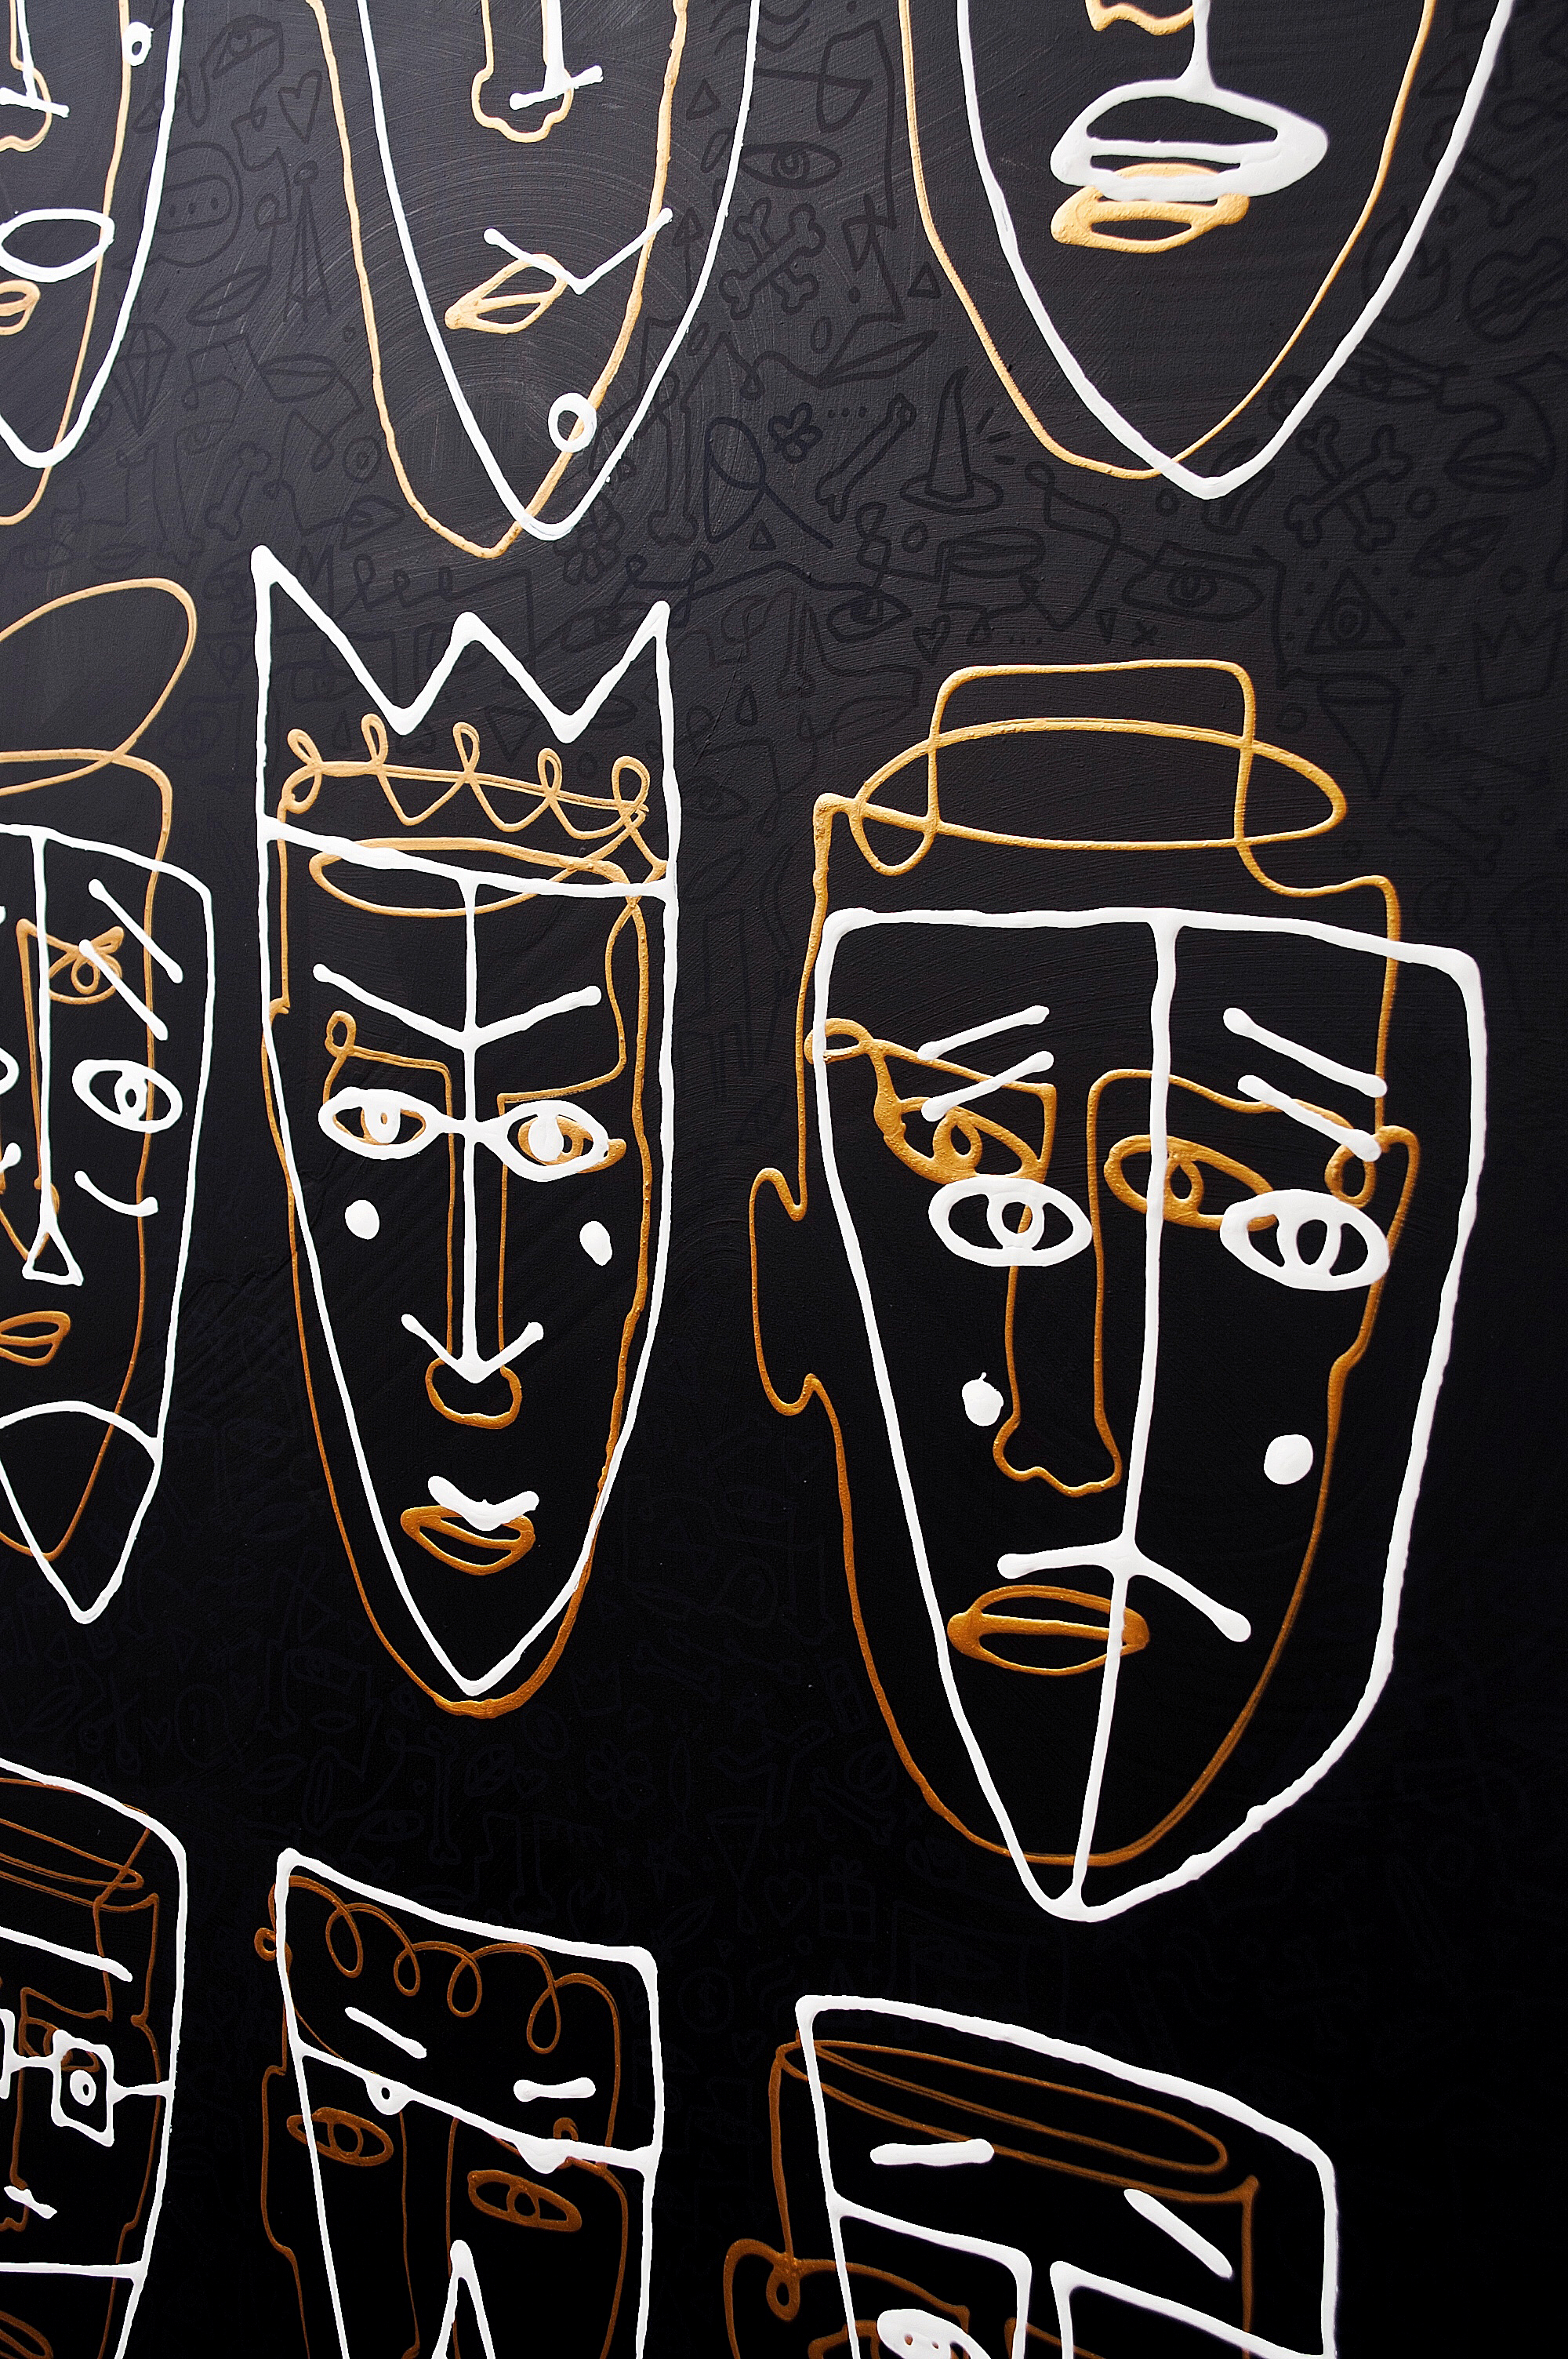 Who am I? - contemporary artwork - monoline white and gold faces on black - masks on faces - pattern with objects on the back